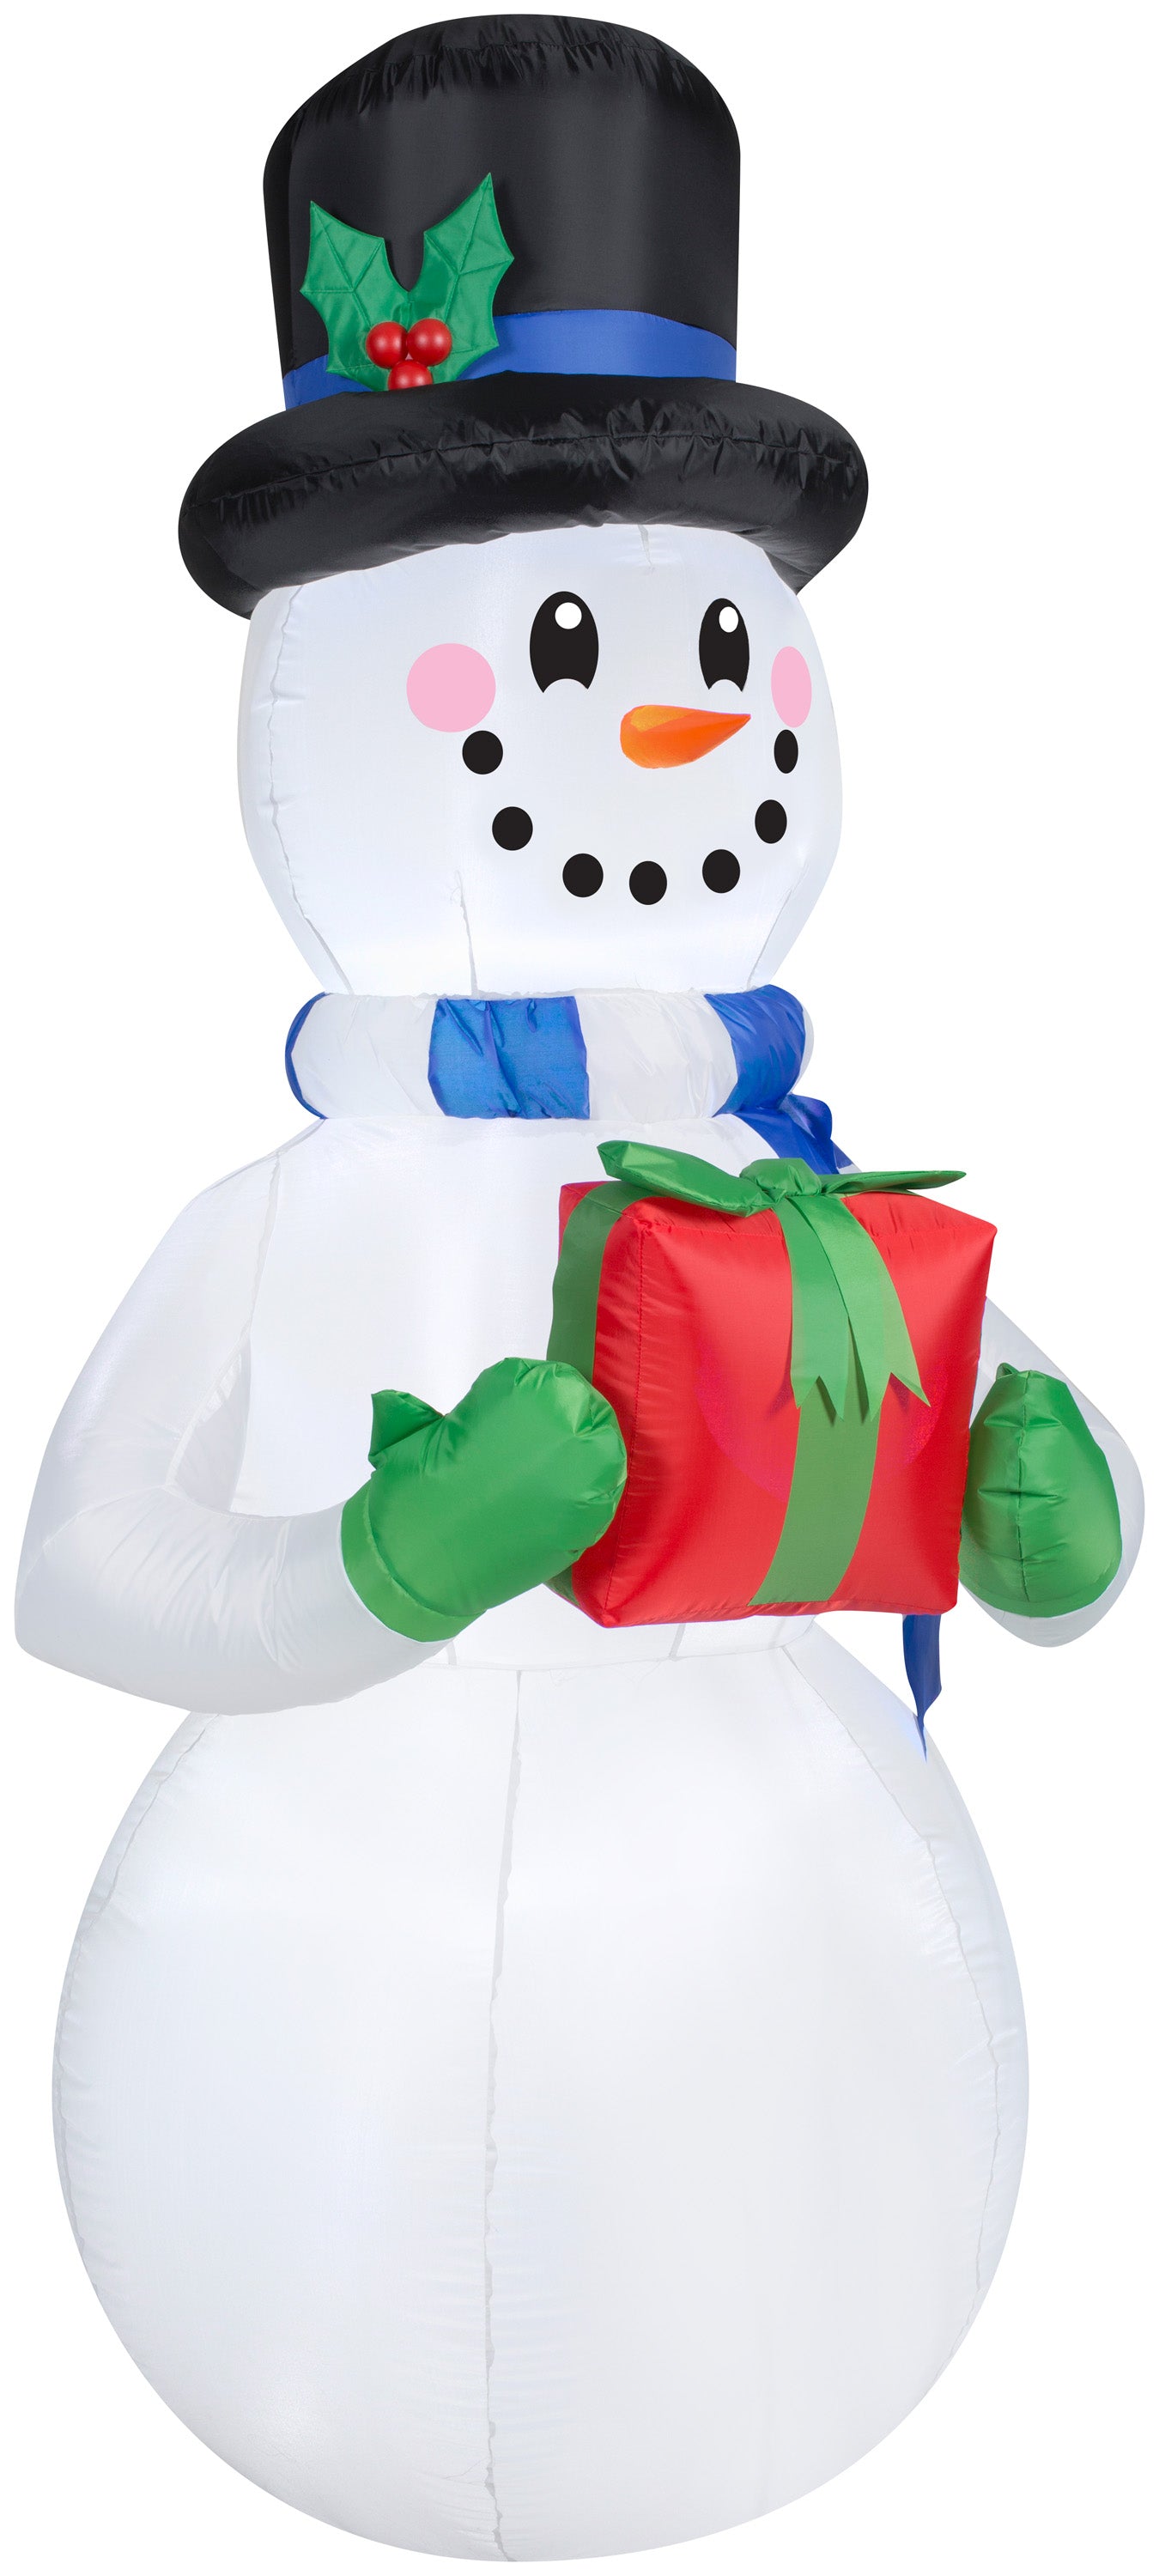 Gemmy Christmas Airblown Inflatable Inflatable Snowman, 8 ft Tall, white